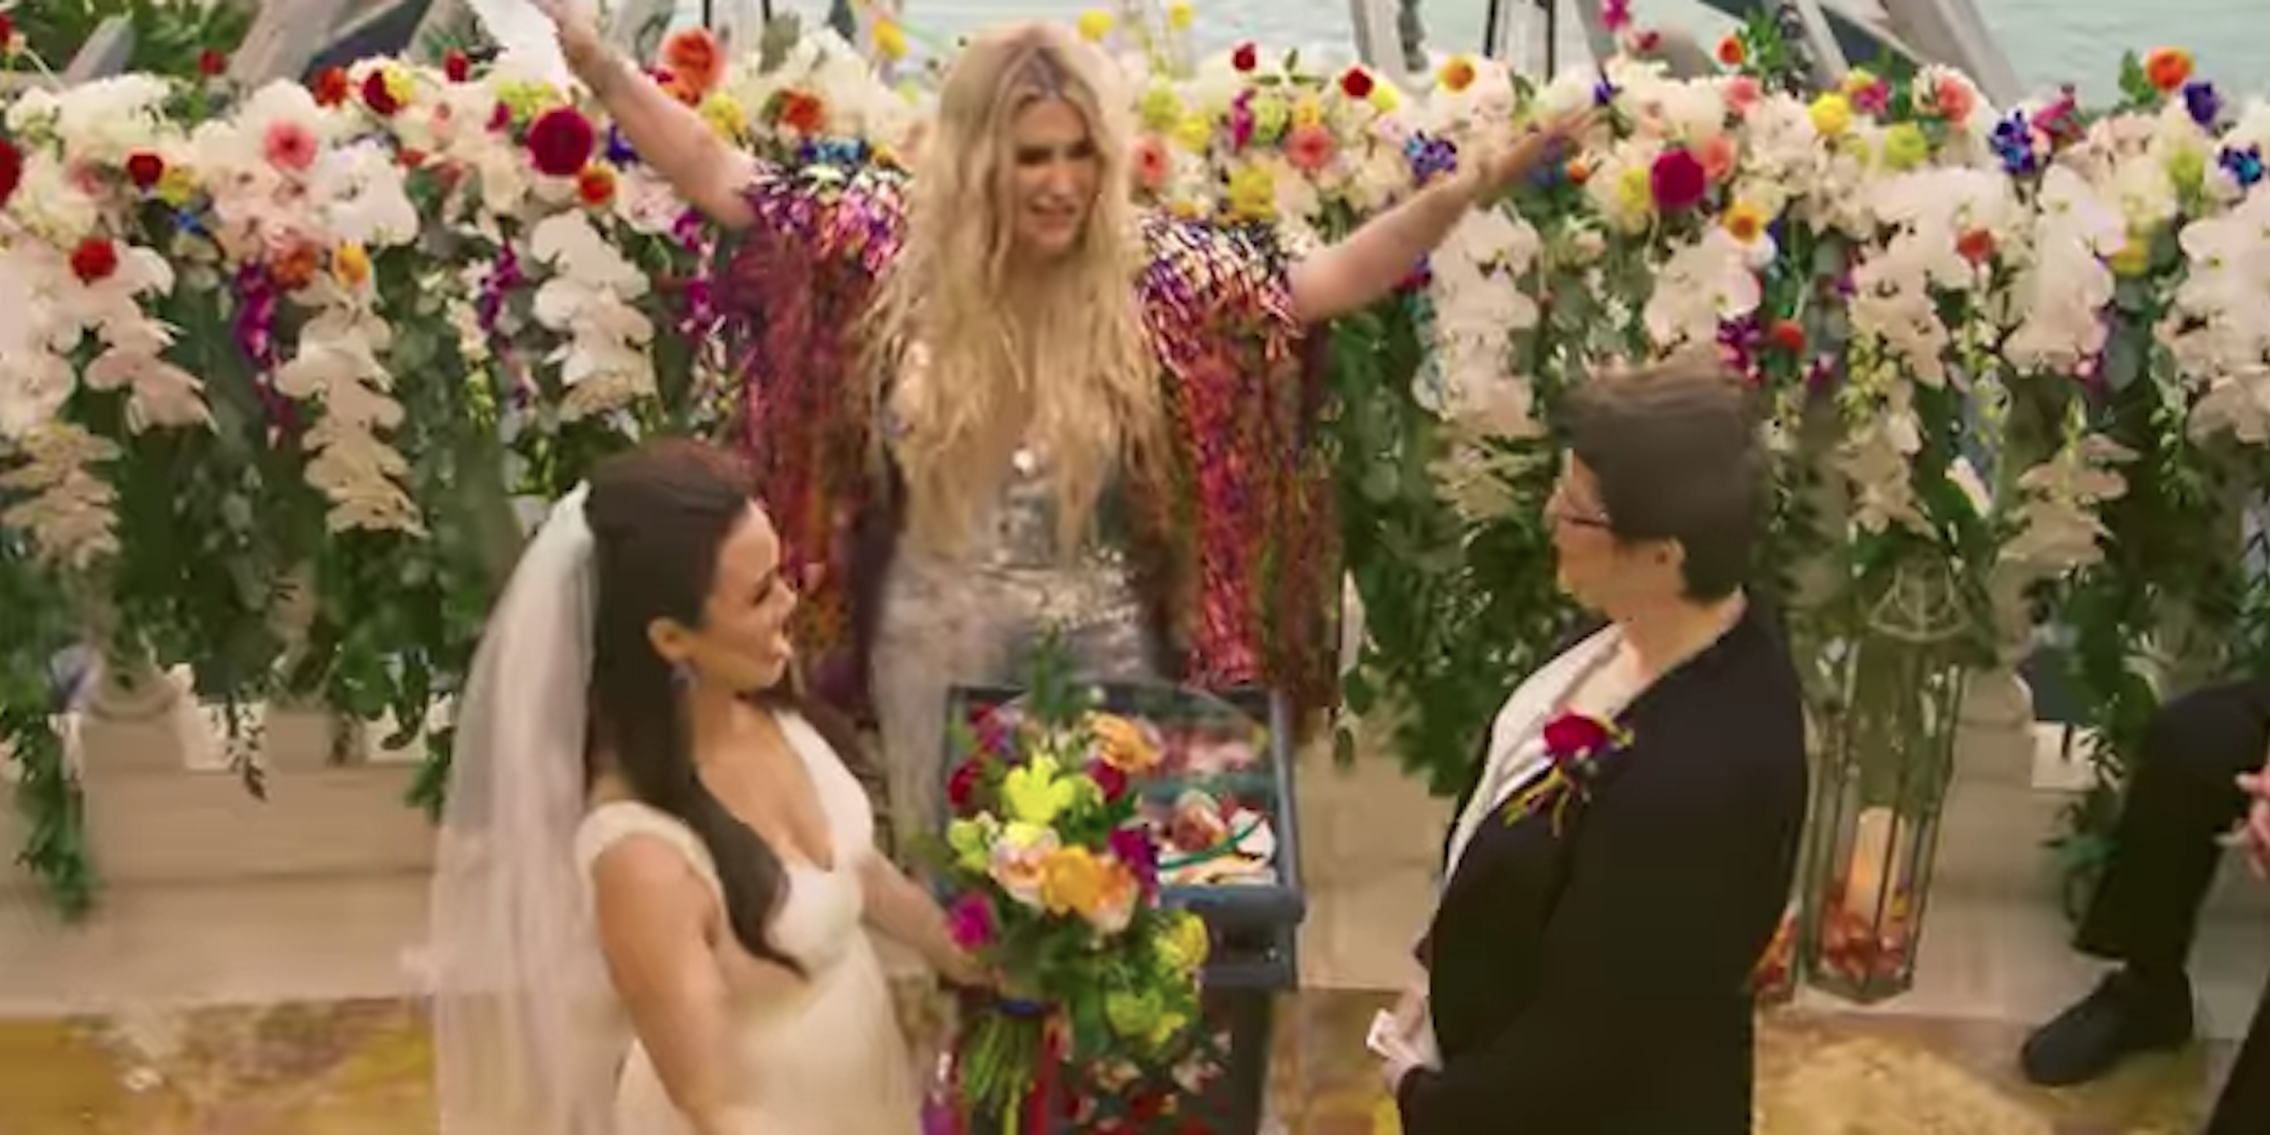 Kesha throws her hands up while officiating a wedding for two brides